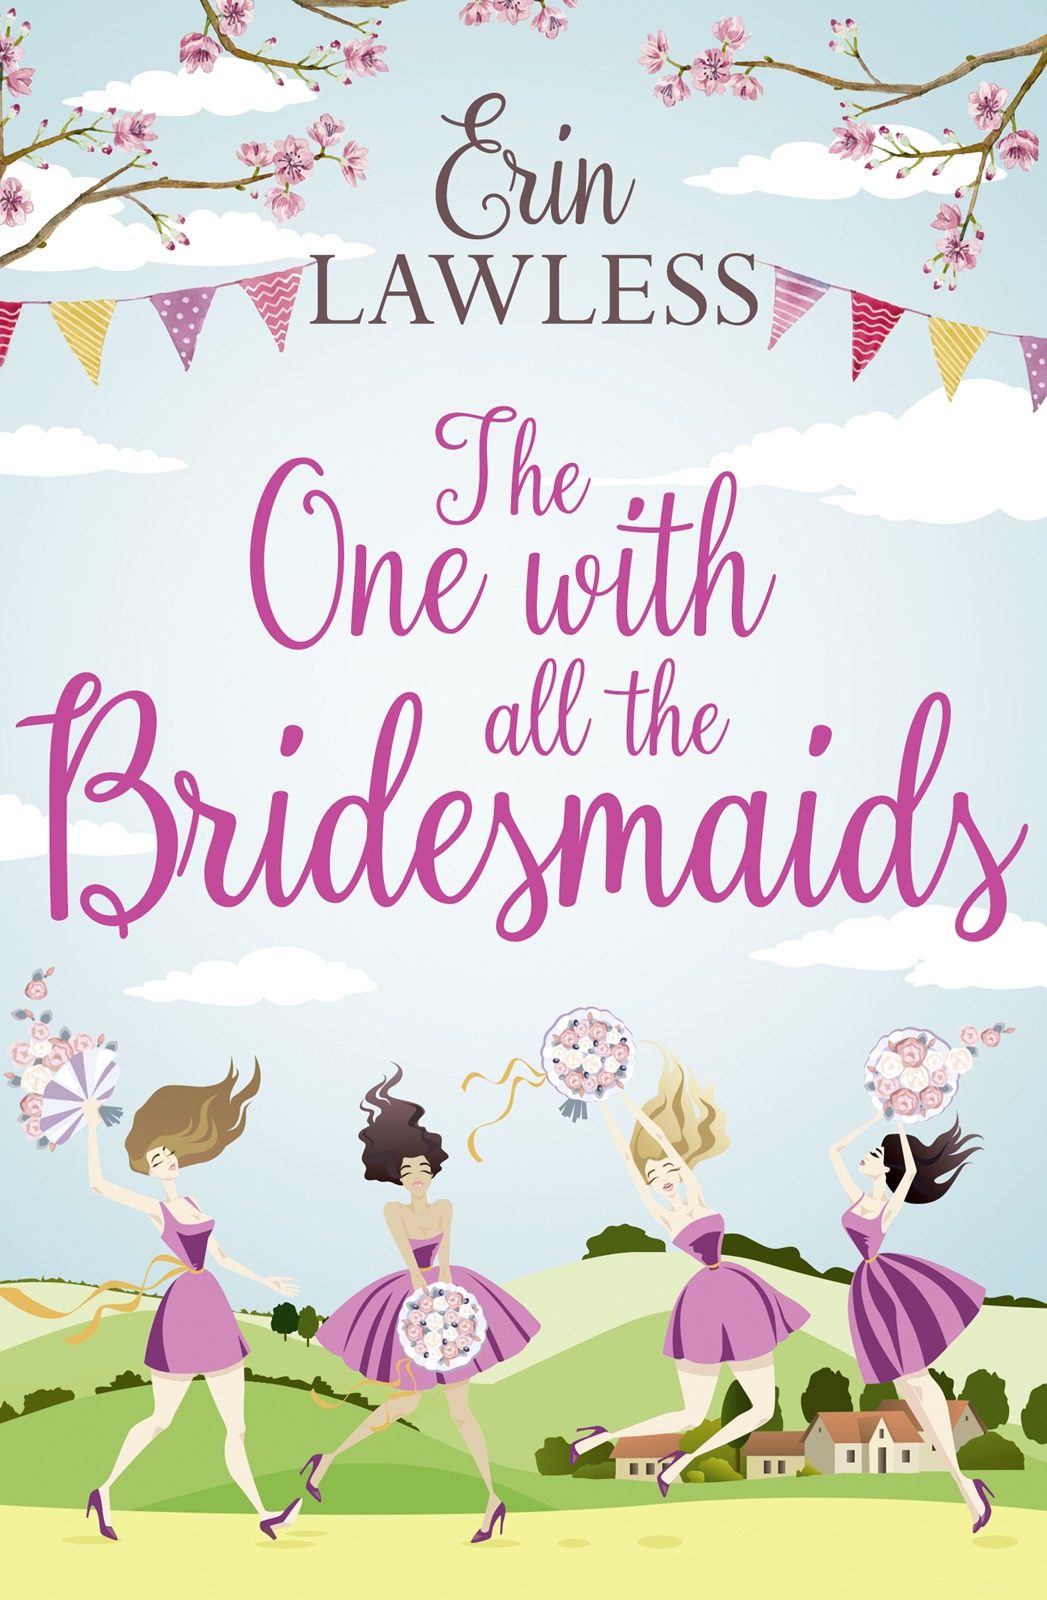 The One with All the Bridesmaids: A hilarious, feel-good romantic comedy